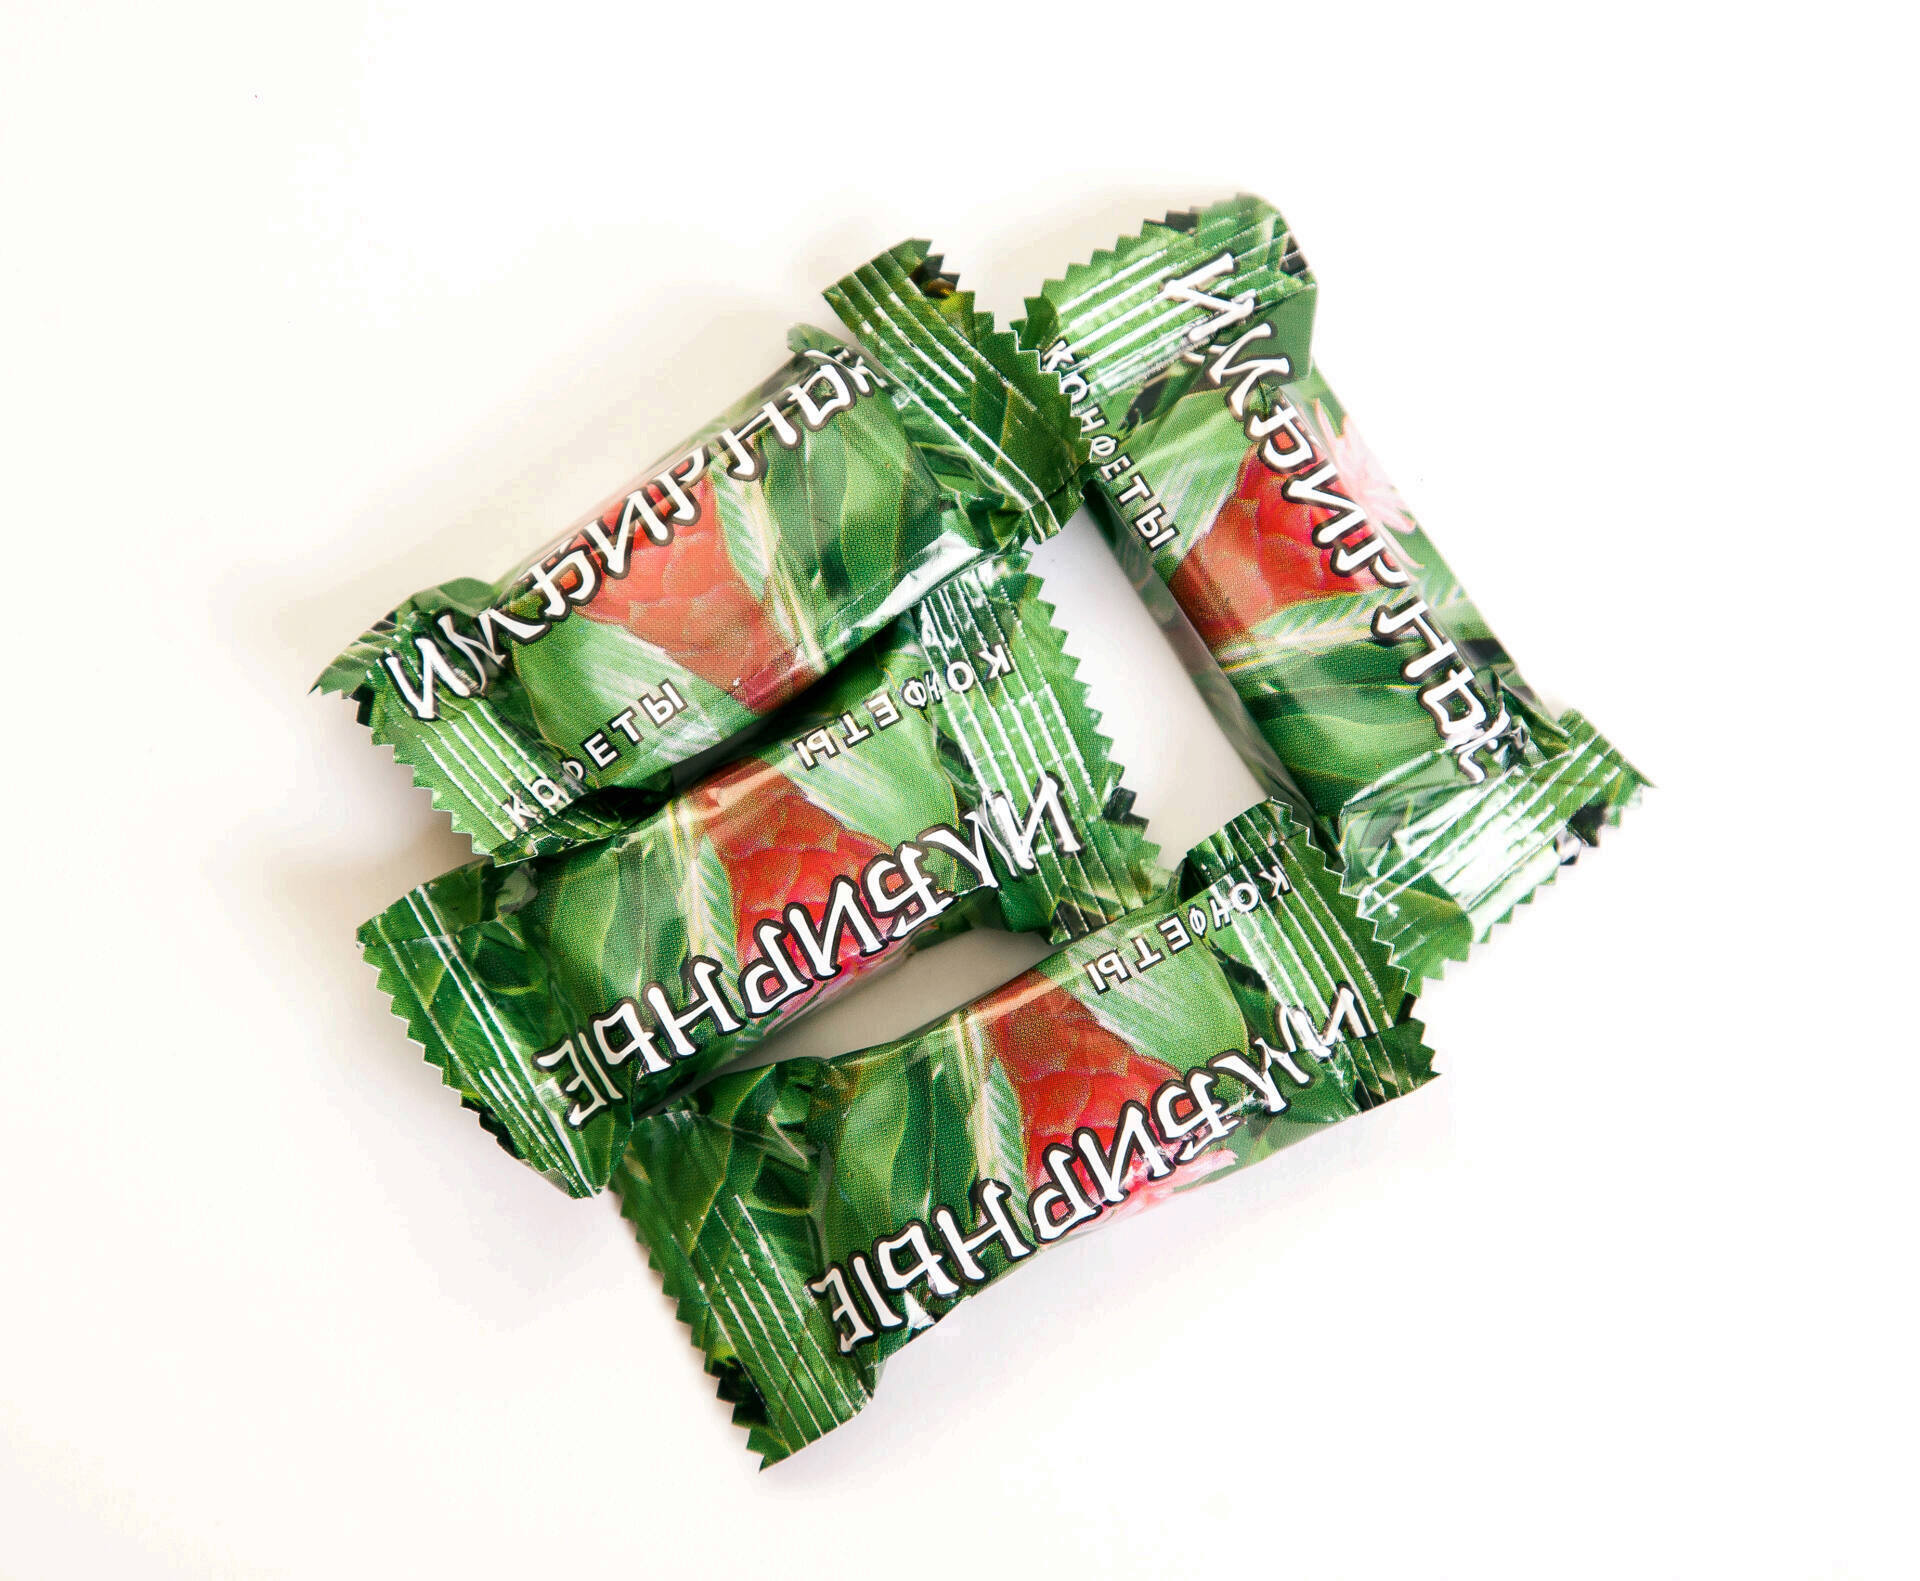 Jelly Ginger candies (weight), W/h